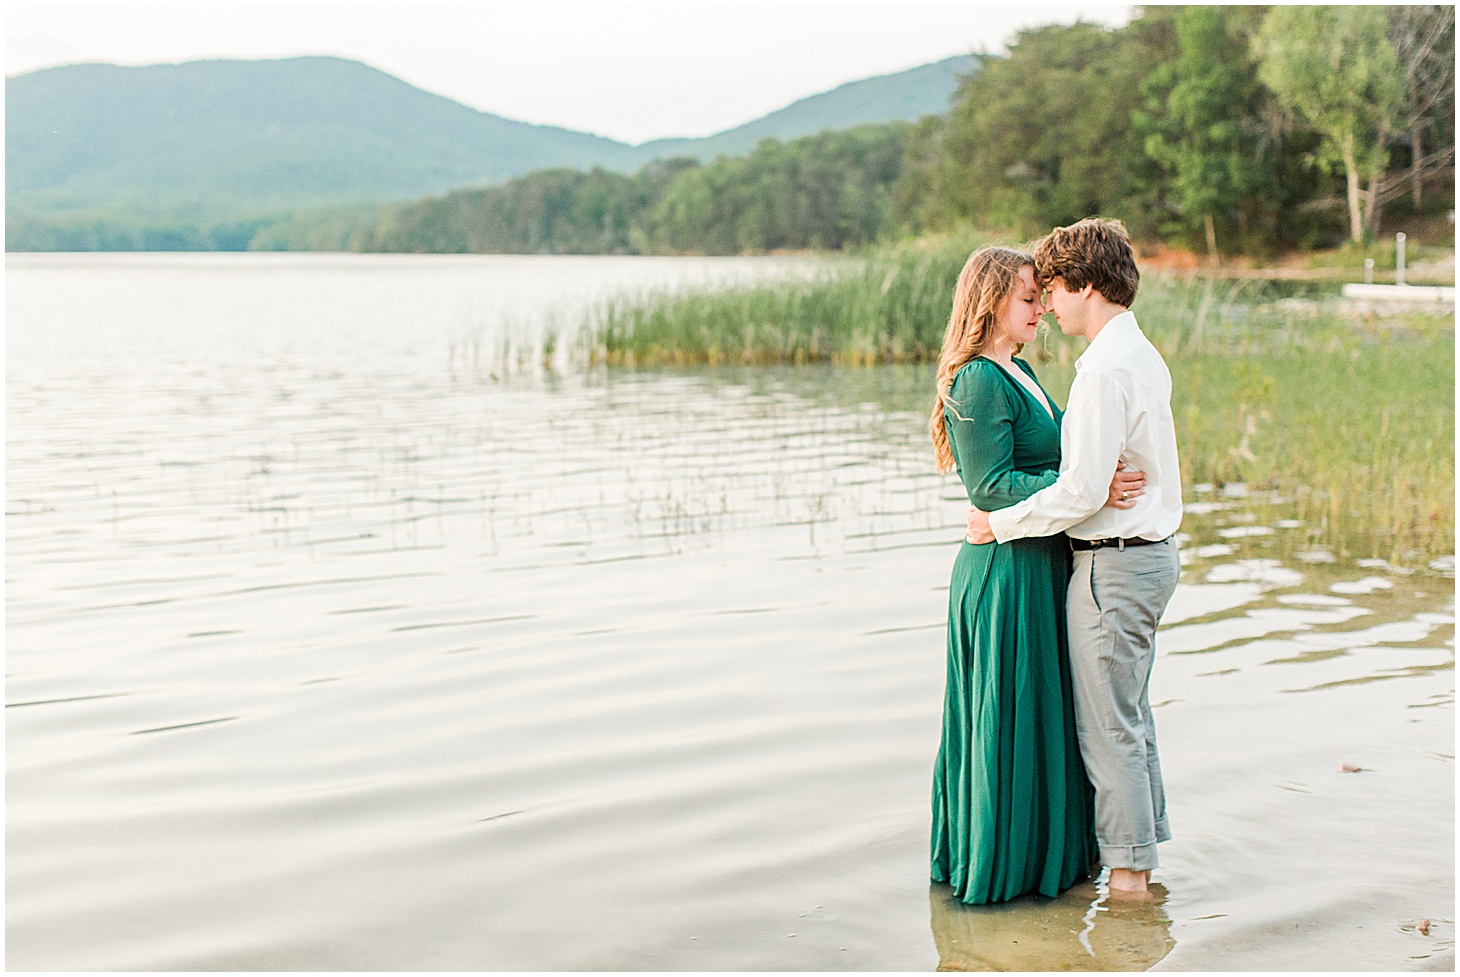 carvinscoveengagementsession_roanokeengagementsession_carvinscove_virginiawedding_virginiaweddingphotographer_vaweddingphotographer_photo_0066.jpg